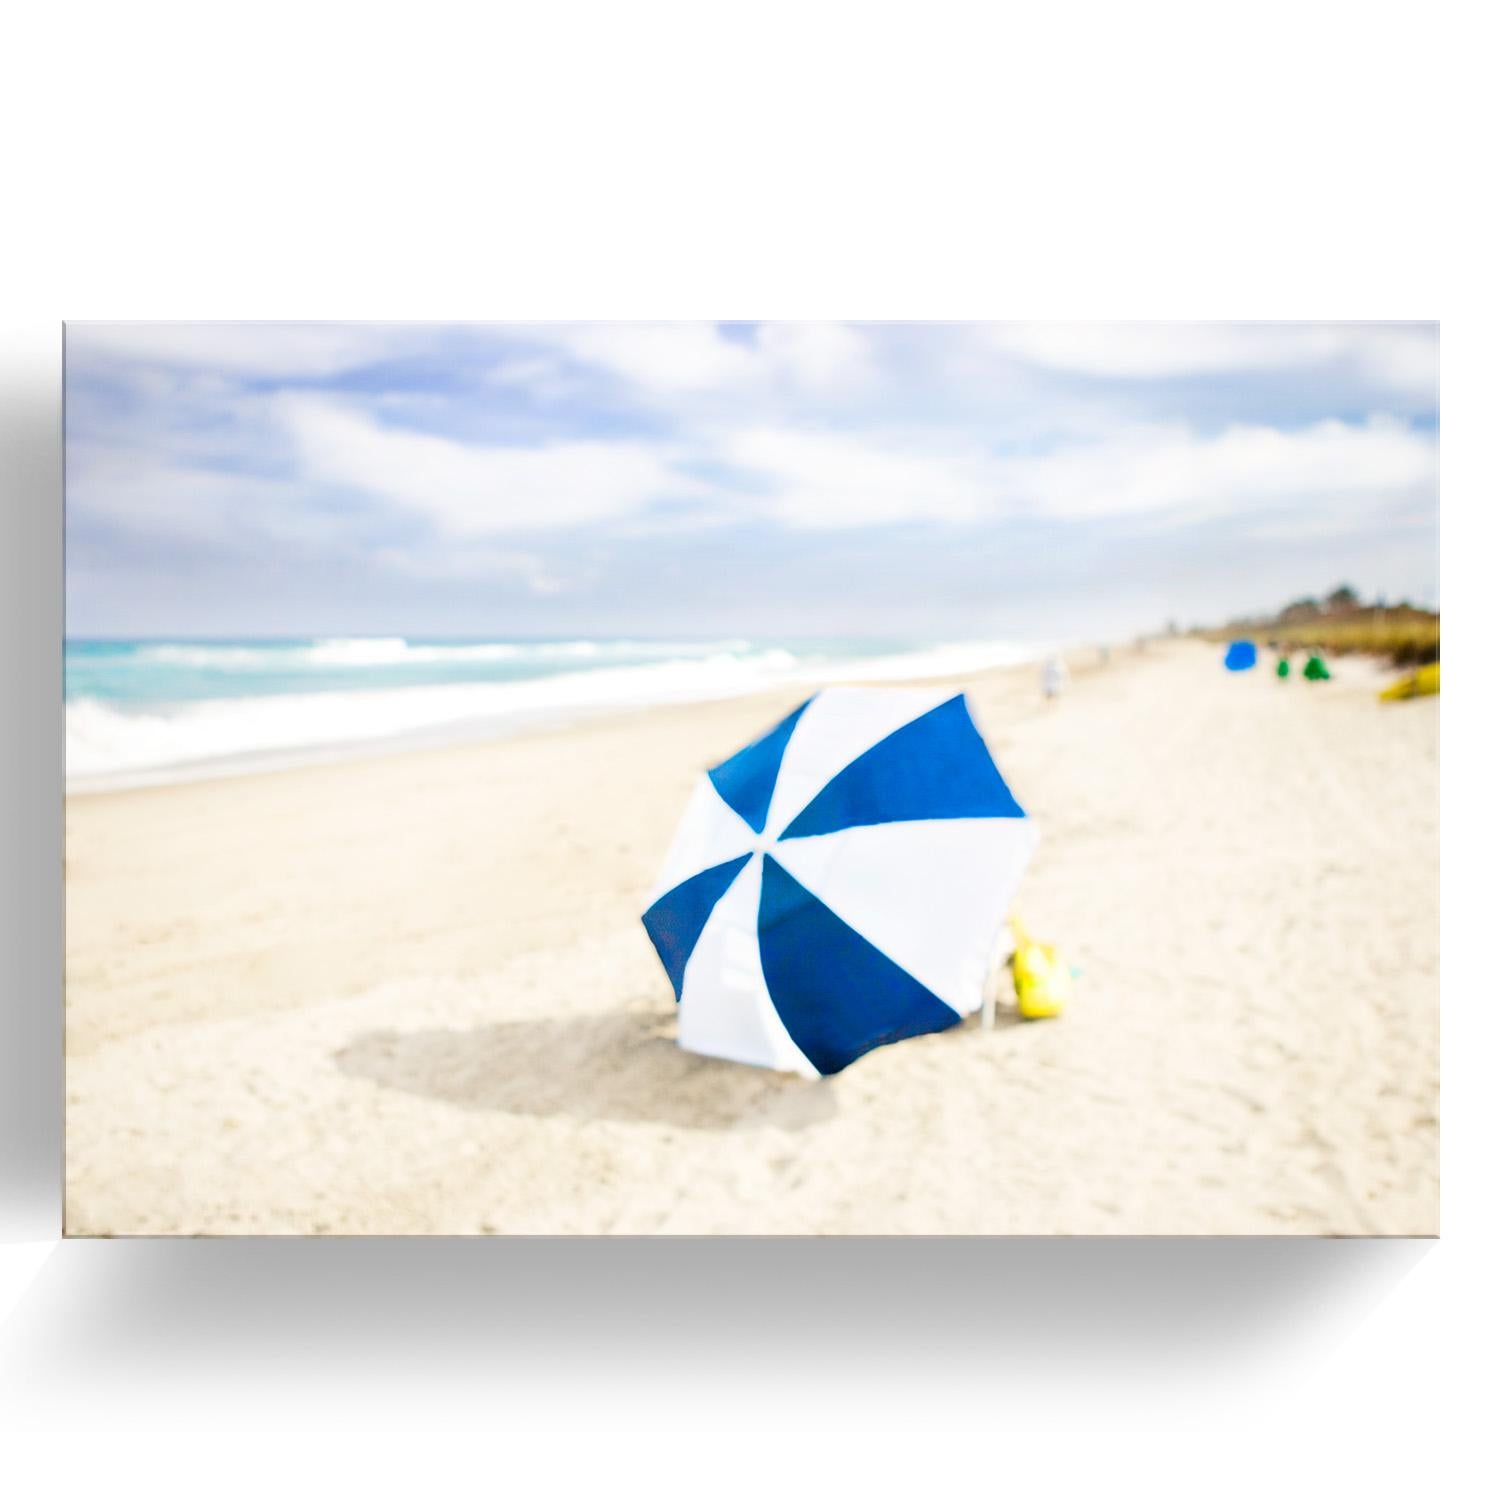 ‘Beach Series: Lone Umbrella' Mounted Plexiglass Limited Edition Photograph features a hazy beach scene in tones of blue, yellow, sand, white, and green. Inspired by nature and human connectivity, the intimacy behind her work is evident. Renowned